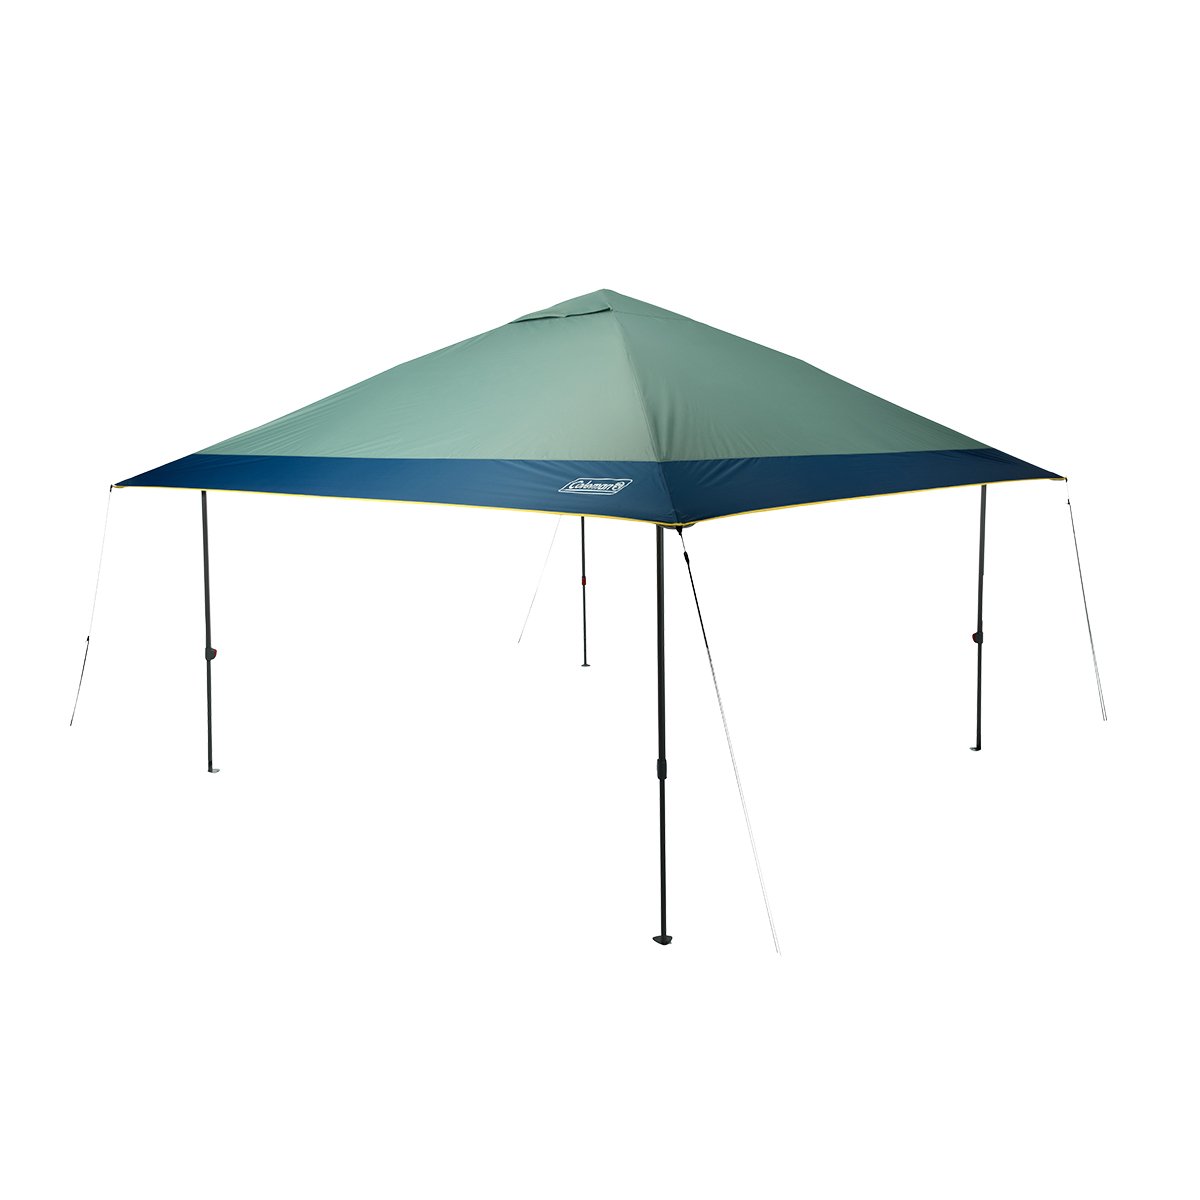 COLEMAN OASIS CANOPY 10X10 ONEPEAK MOSS WITH SUNWALL